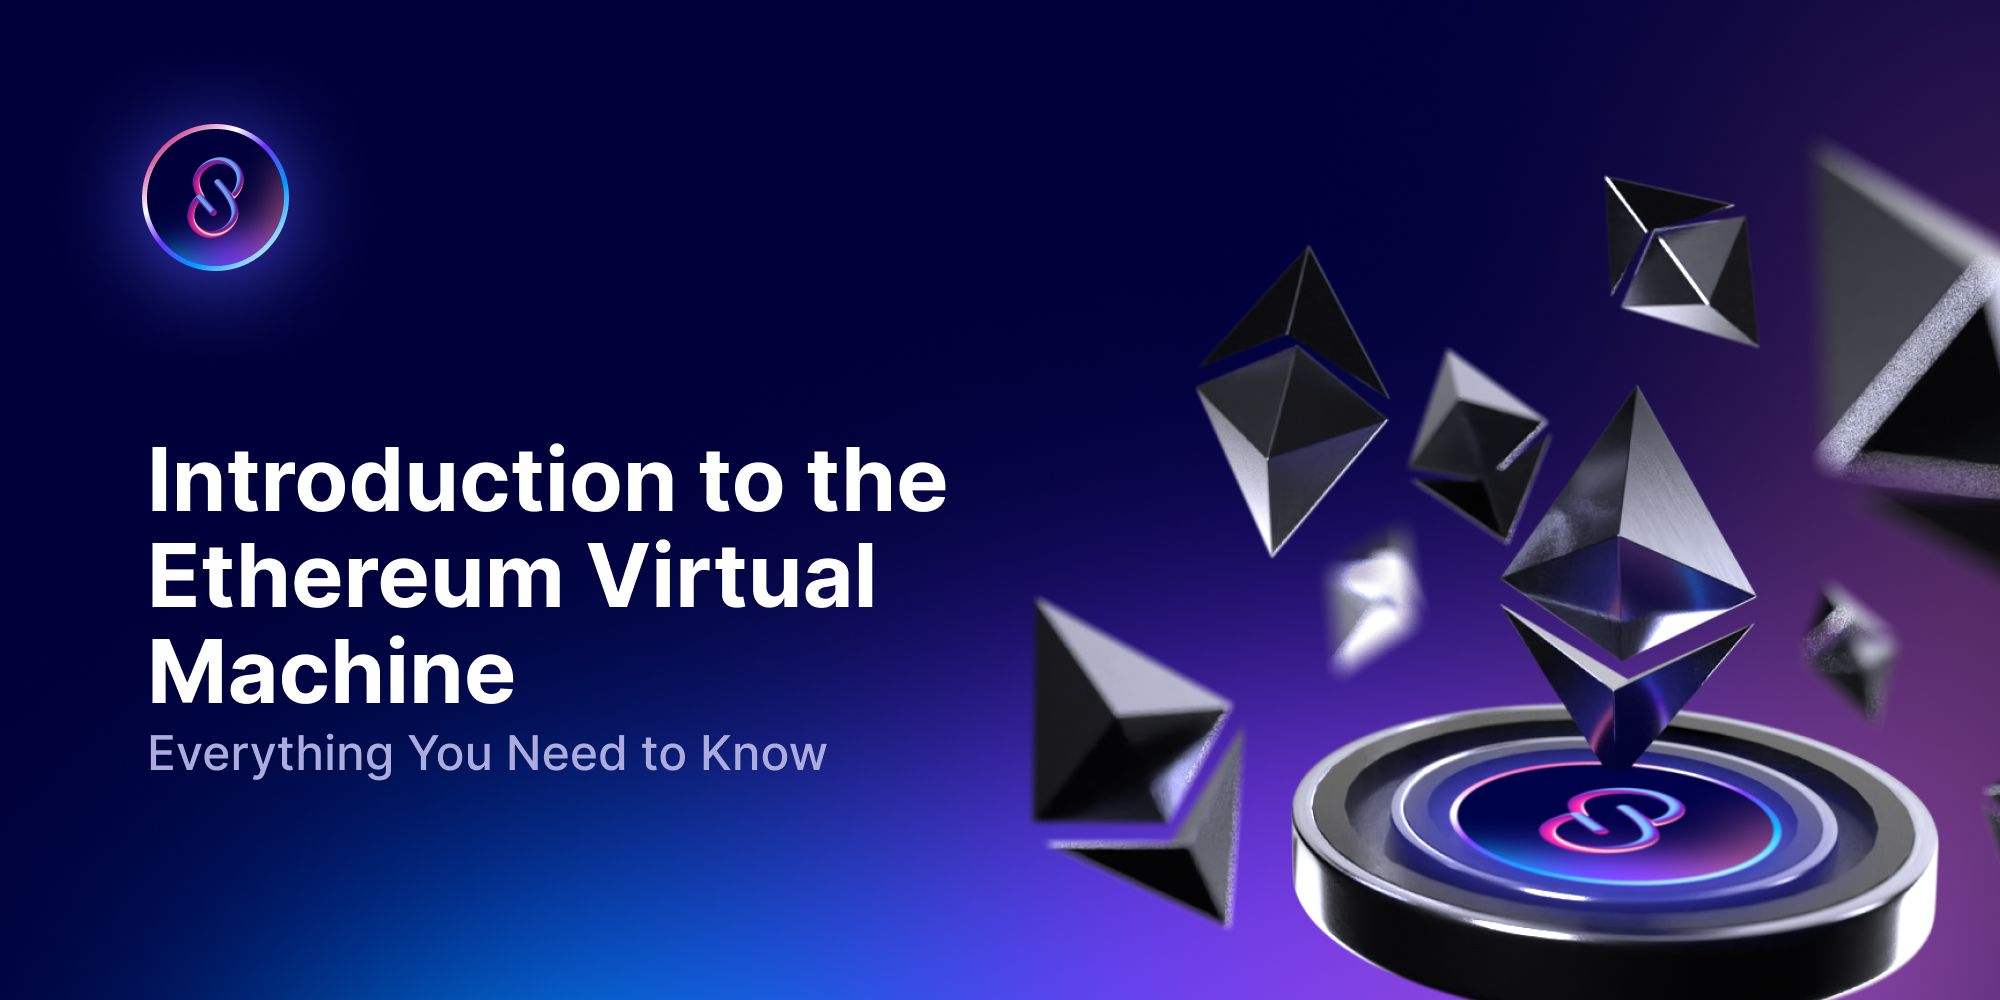 Introduction to the Ethereum Virtual Machine: Everything You Need to Know